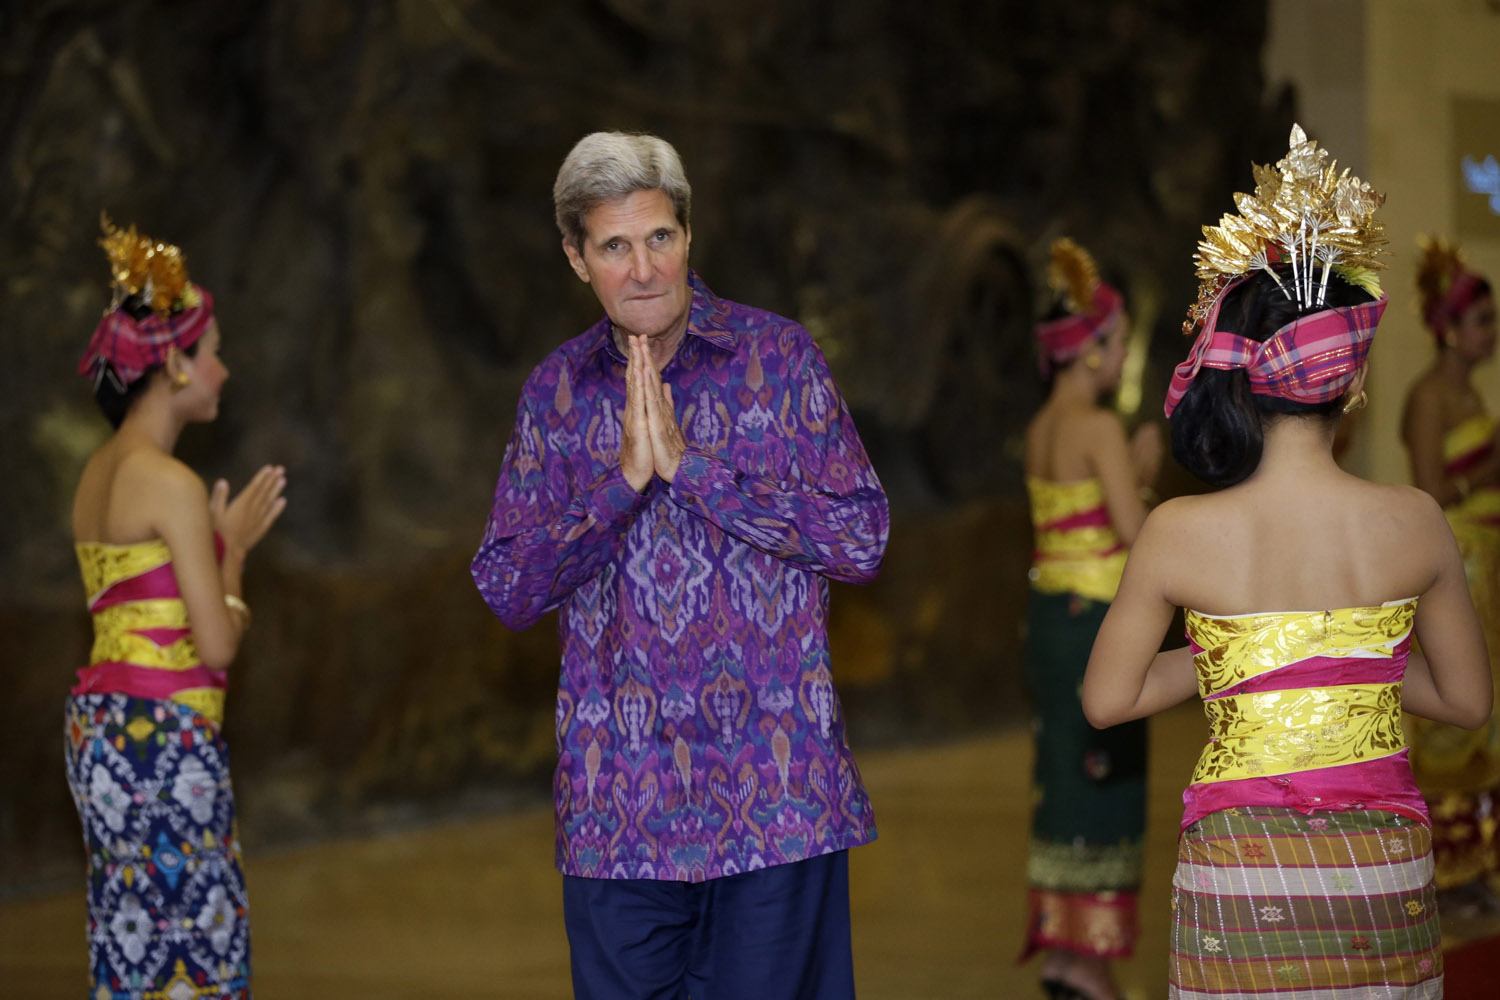 Oct. 7, 2013. U.S. Secretary of State John Kerry, wearing 'endek', a traditional Balinese woven fabric, poses upon arrival for a dinner for leaders of the Asia-Pacific Economic Cooperation (APEC) forum in Bali, Indonesia.